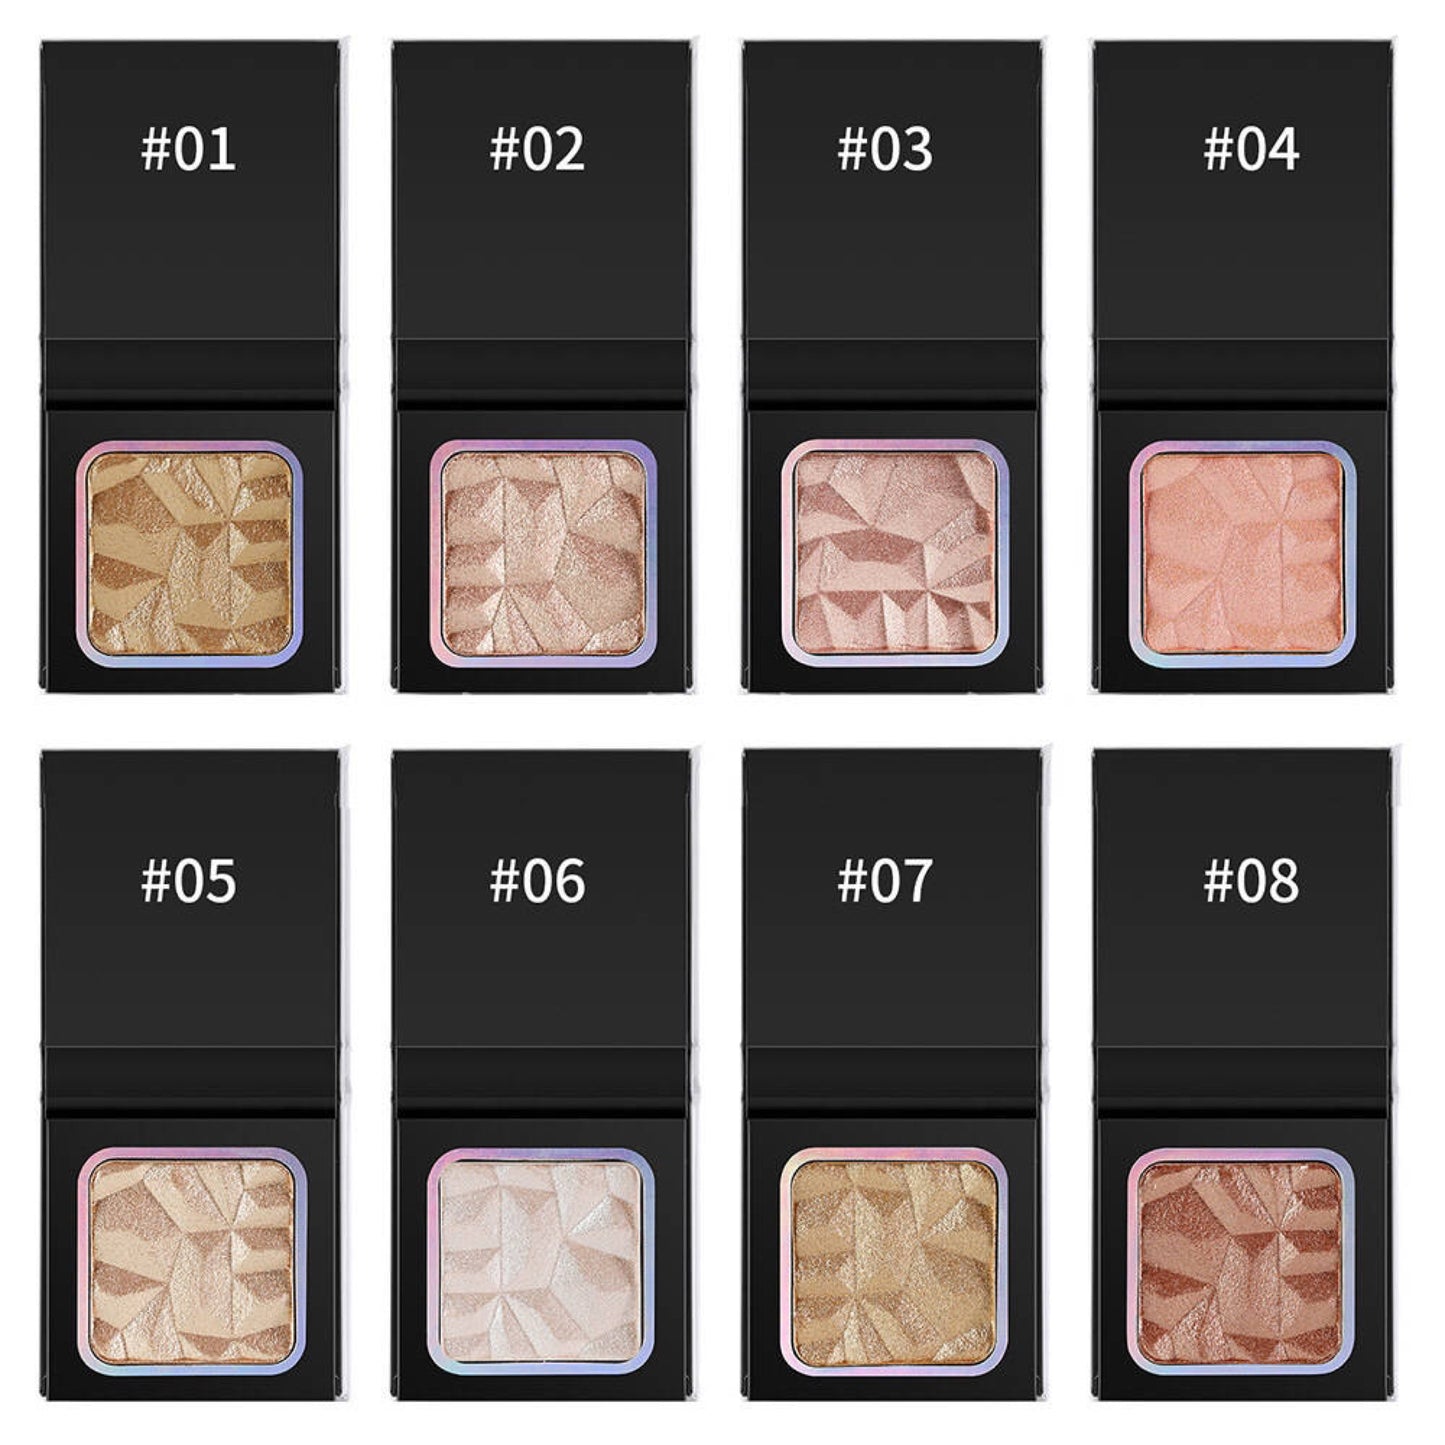 Pressed Face Highlighter Palettes